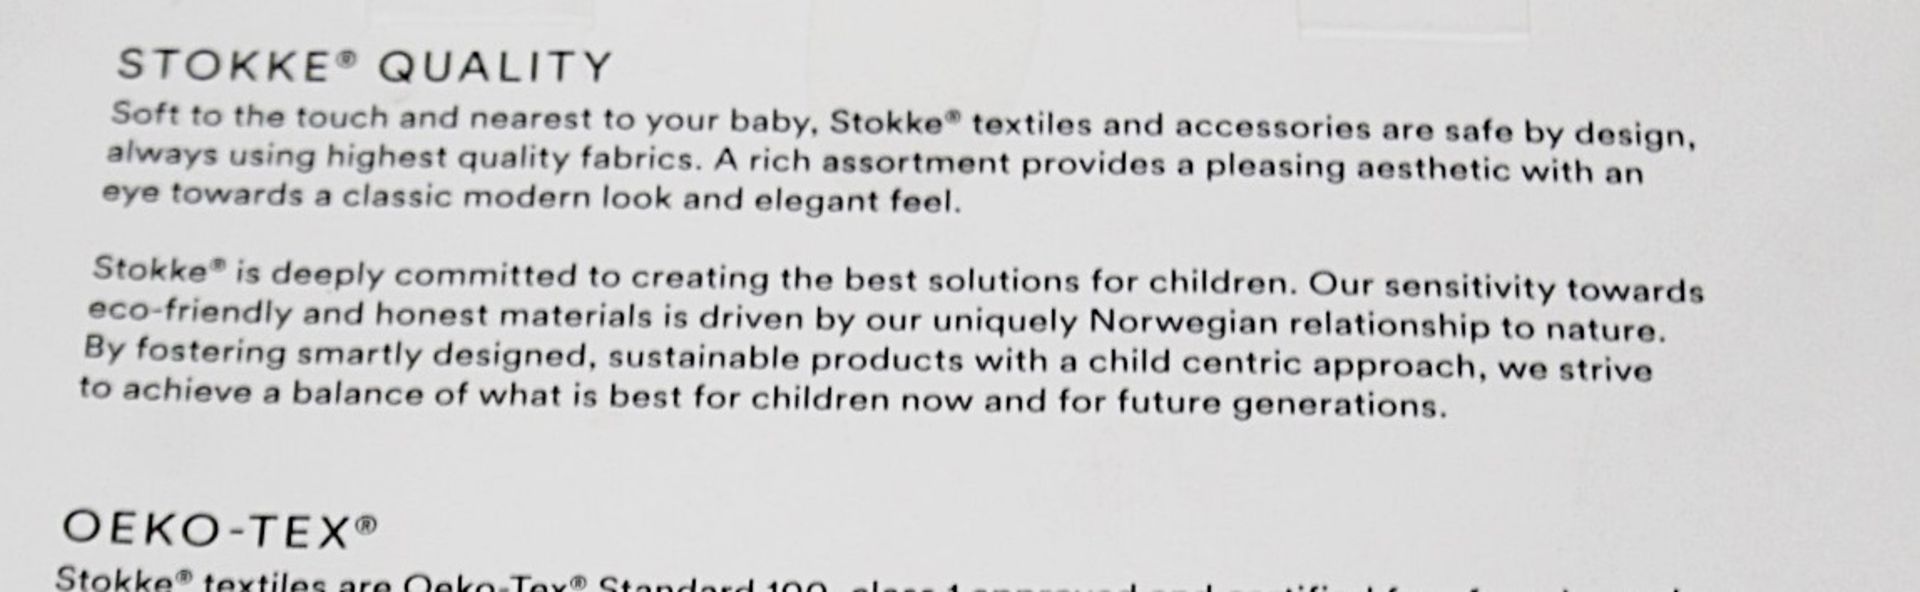 1 x STOKKE Sleepi™ Mini Protection Sheet Oval In White - Dimensions: 72 x 54cm - Unused Boxed - Image 2 of 5